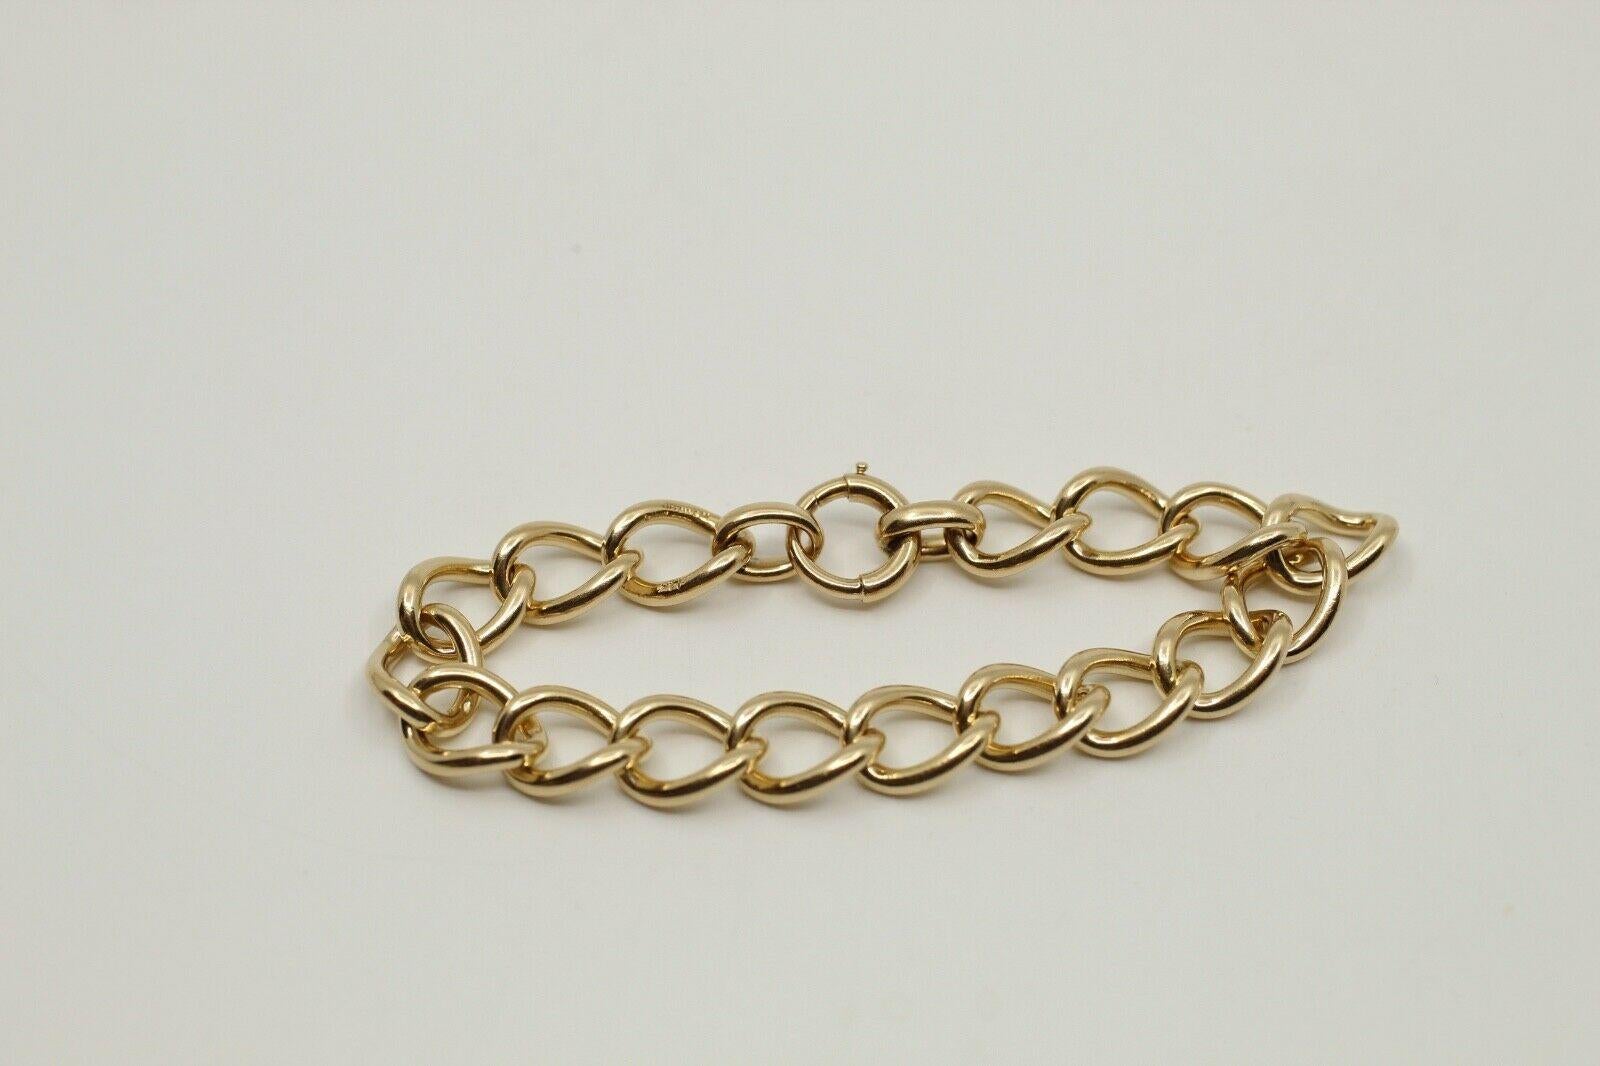 Tiffany & Co. 14k Yellow Gold Link Bracelet Vintage & Rare


Here is your chance to purchase a beautiful and highly collectible designer bracelet.  Truly a great piece at a great price! 

Weight: 24.3 grams

Dimensions: 6.75